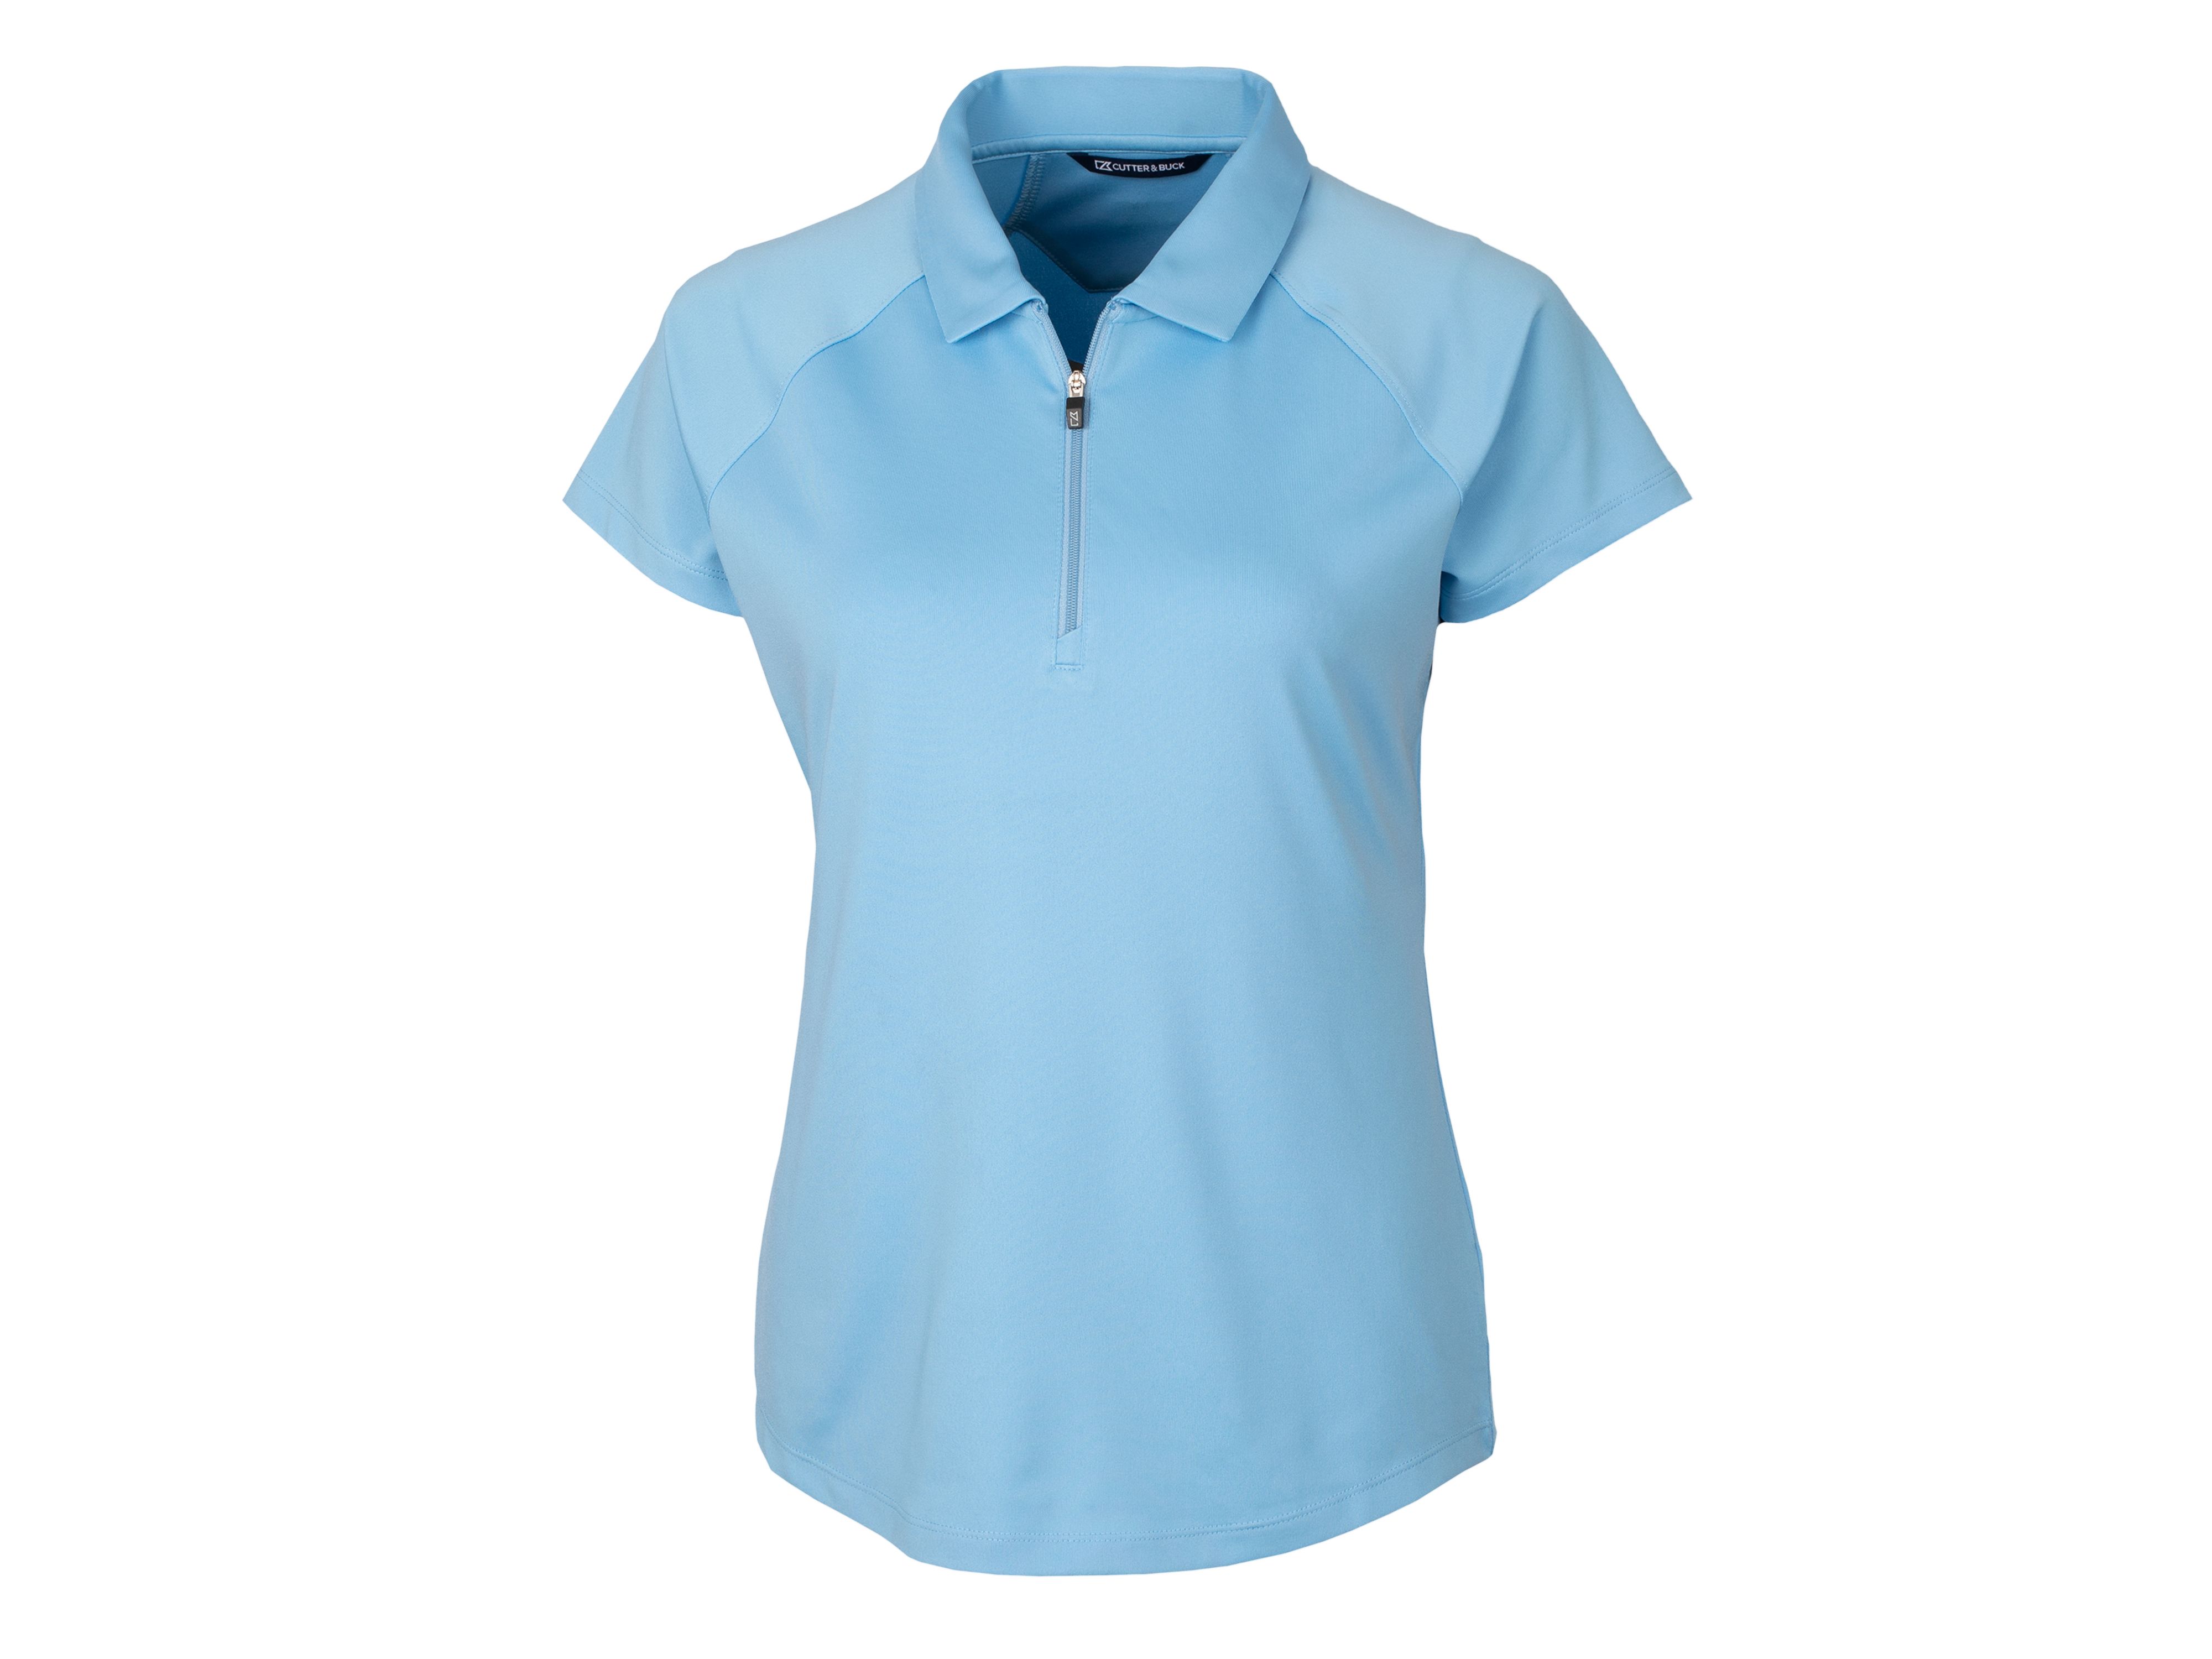 CUTTER & BUCK LCK00071 - Ladies Forge Polo $36.96 - Polo/Sport Shirts